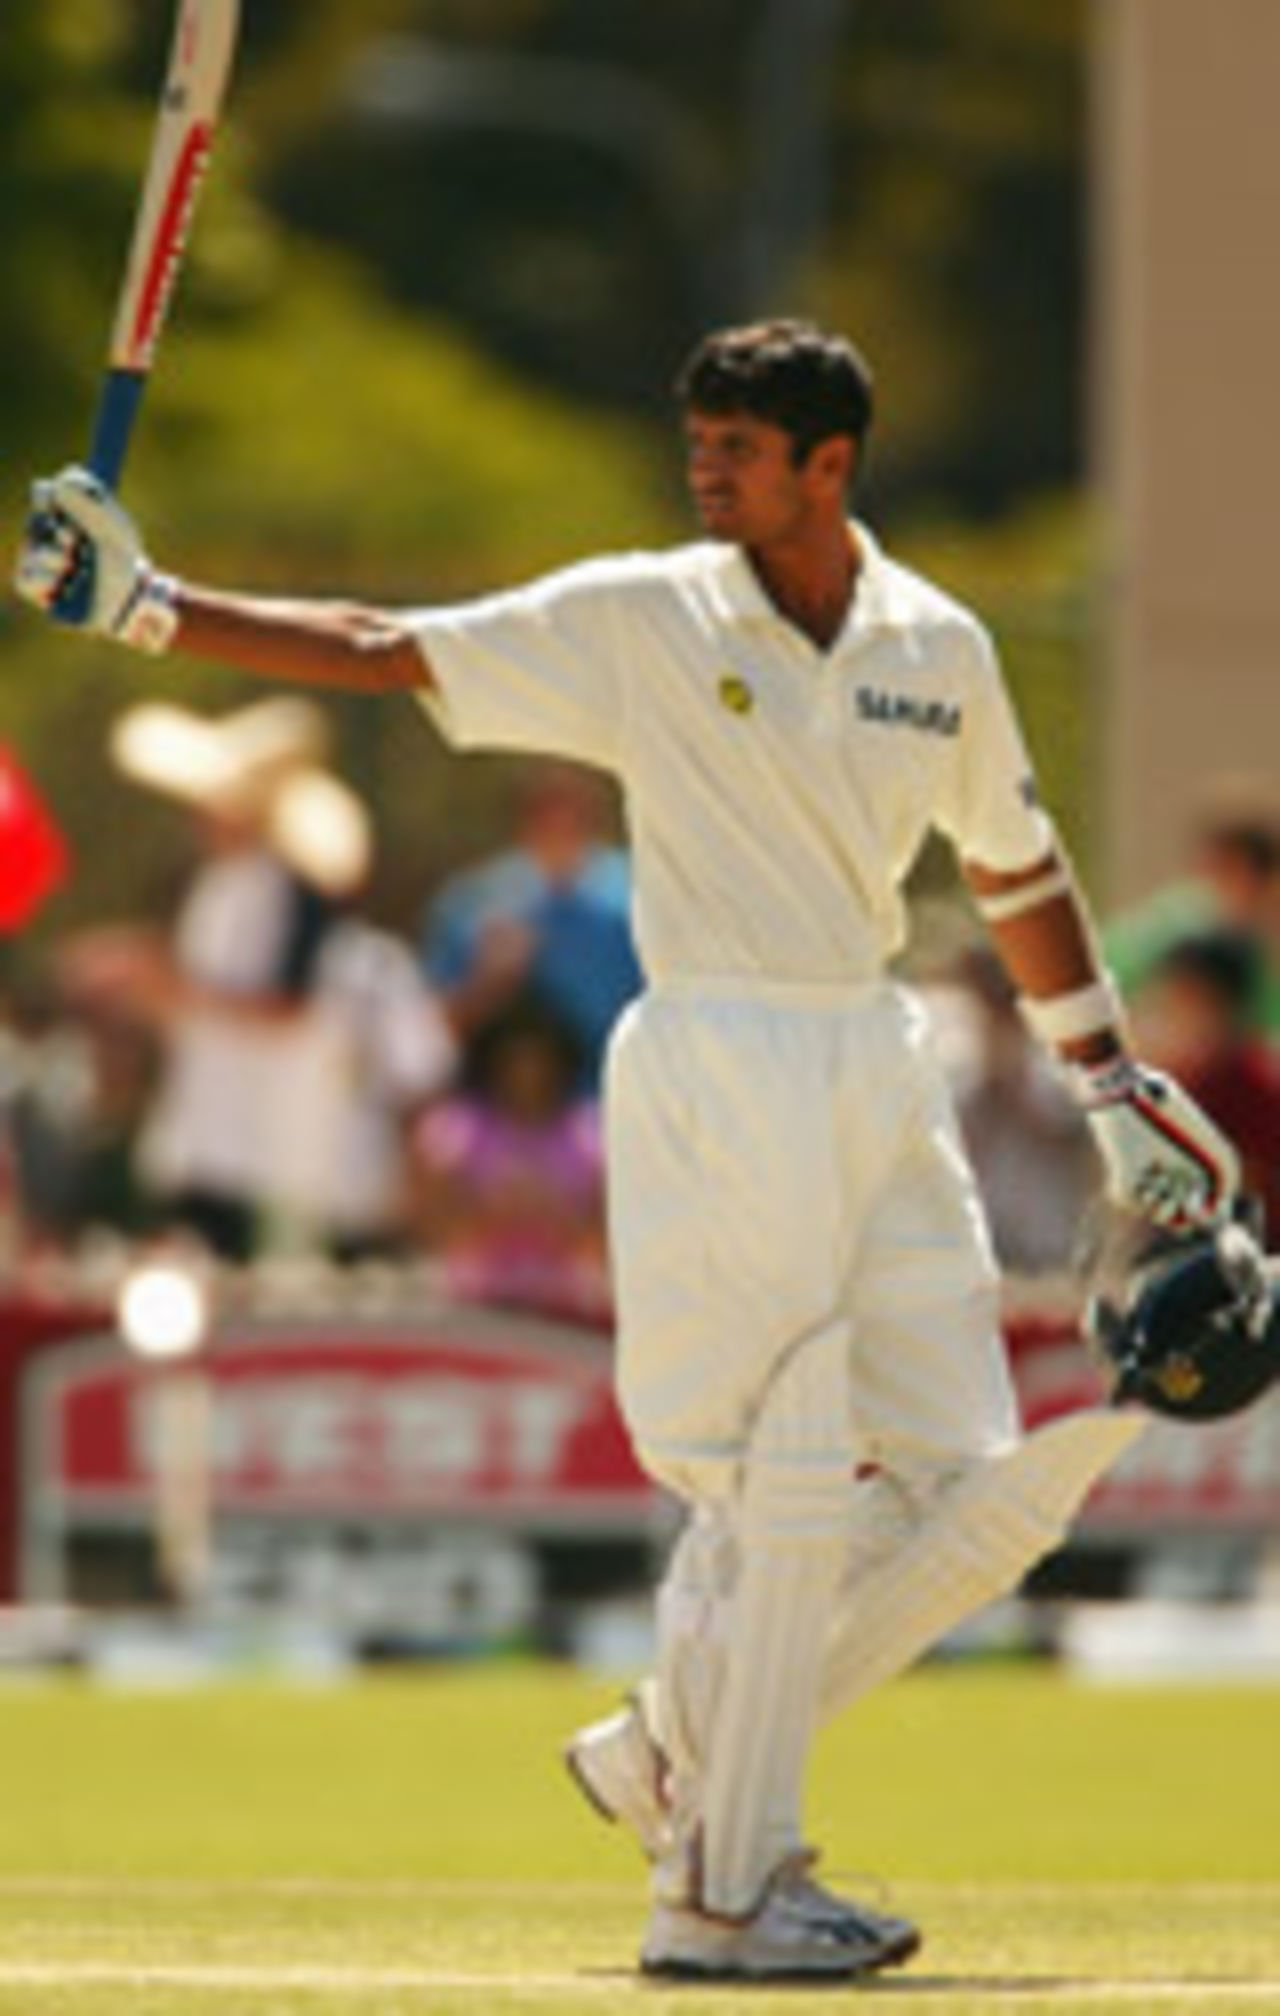 Rahul Dravid acknowledges applause for his double hundred, Australia v India, 2nd Test, Adelaide, December 15, 2003